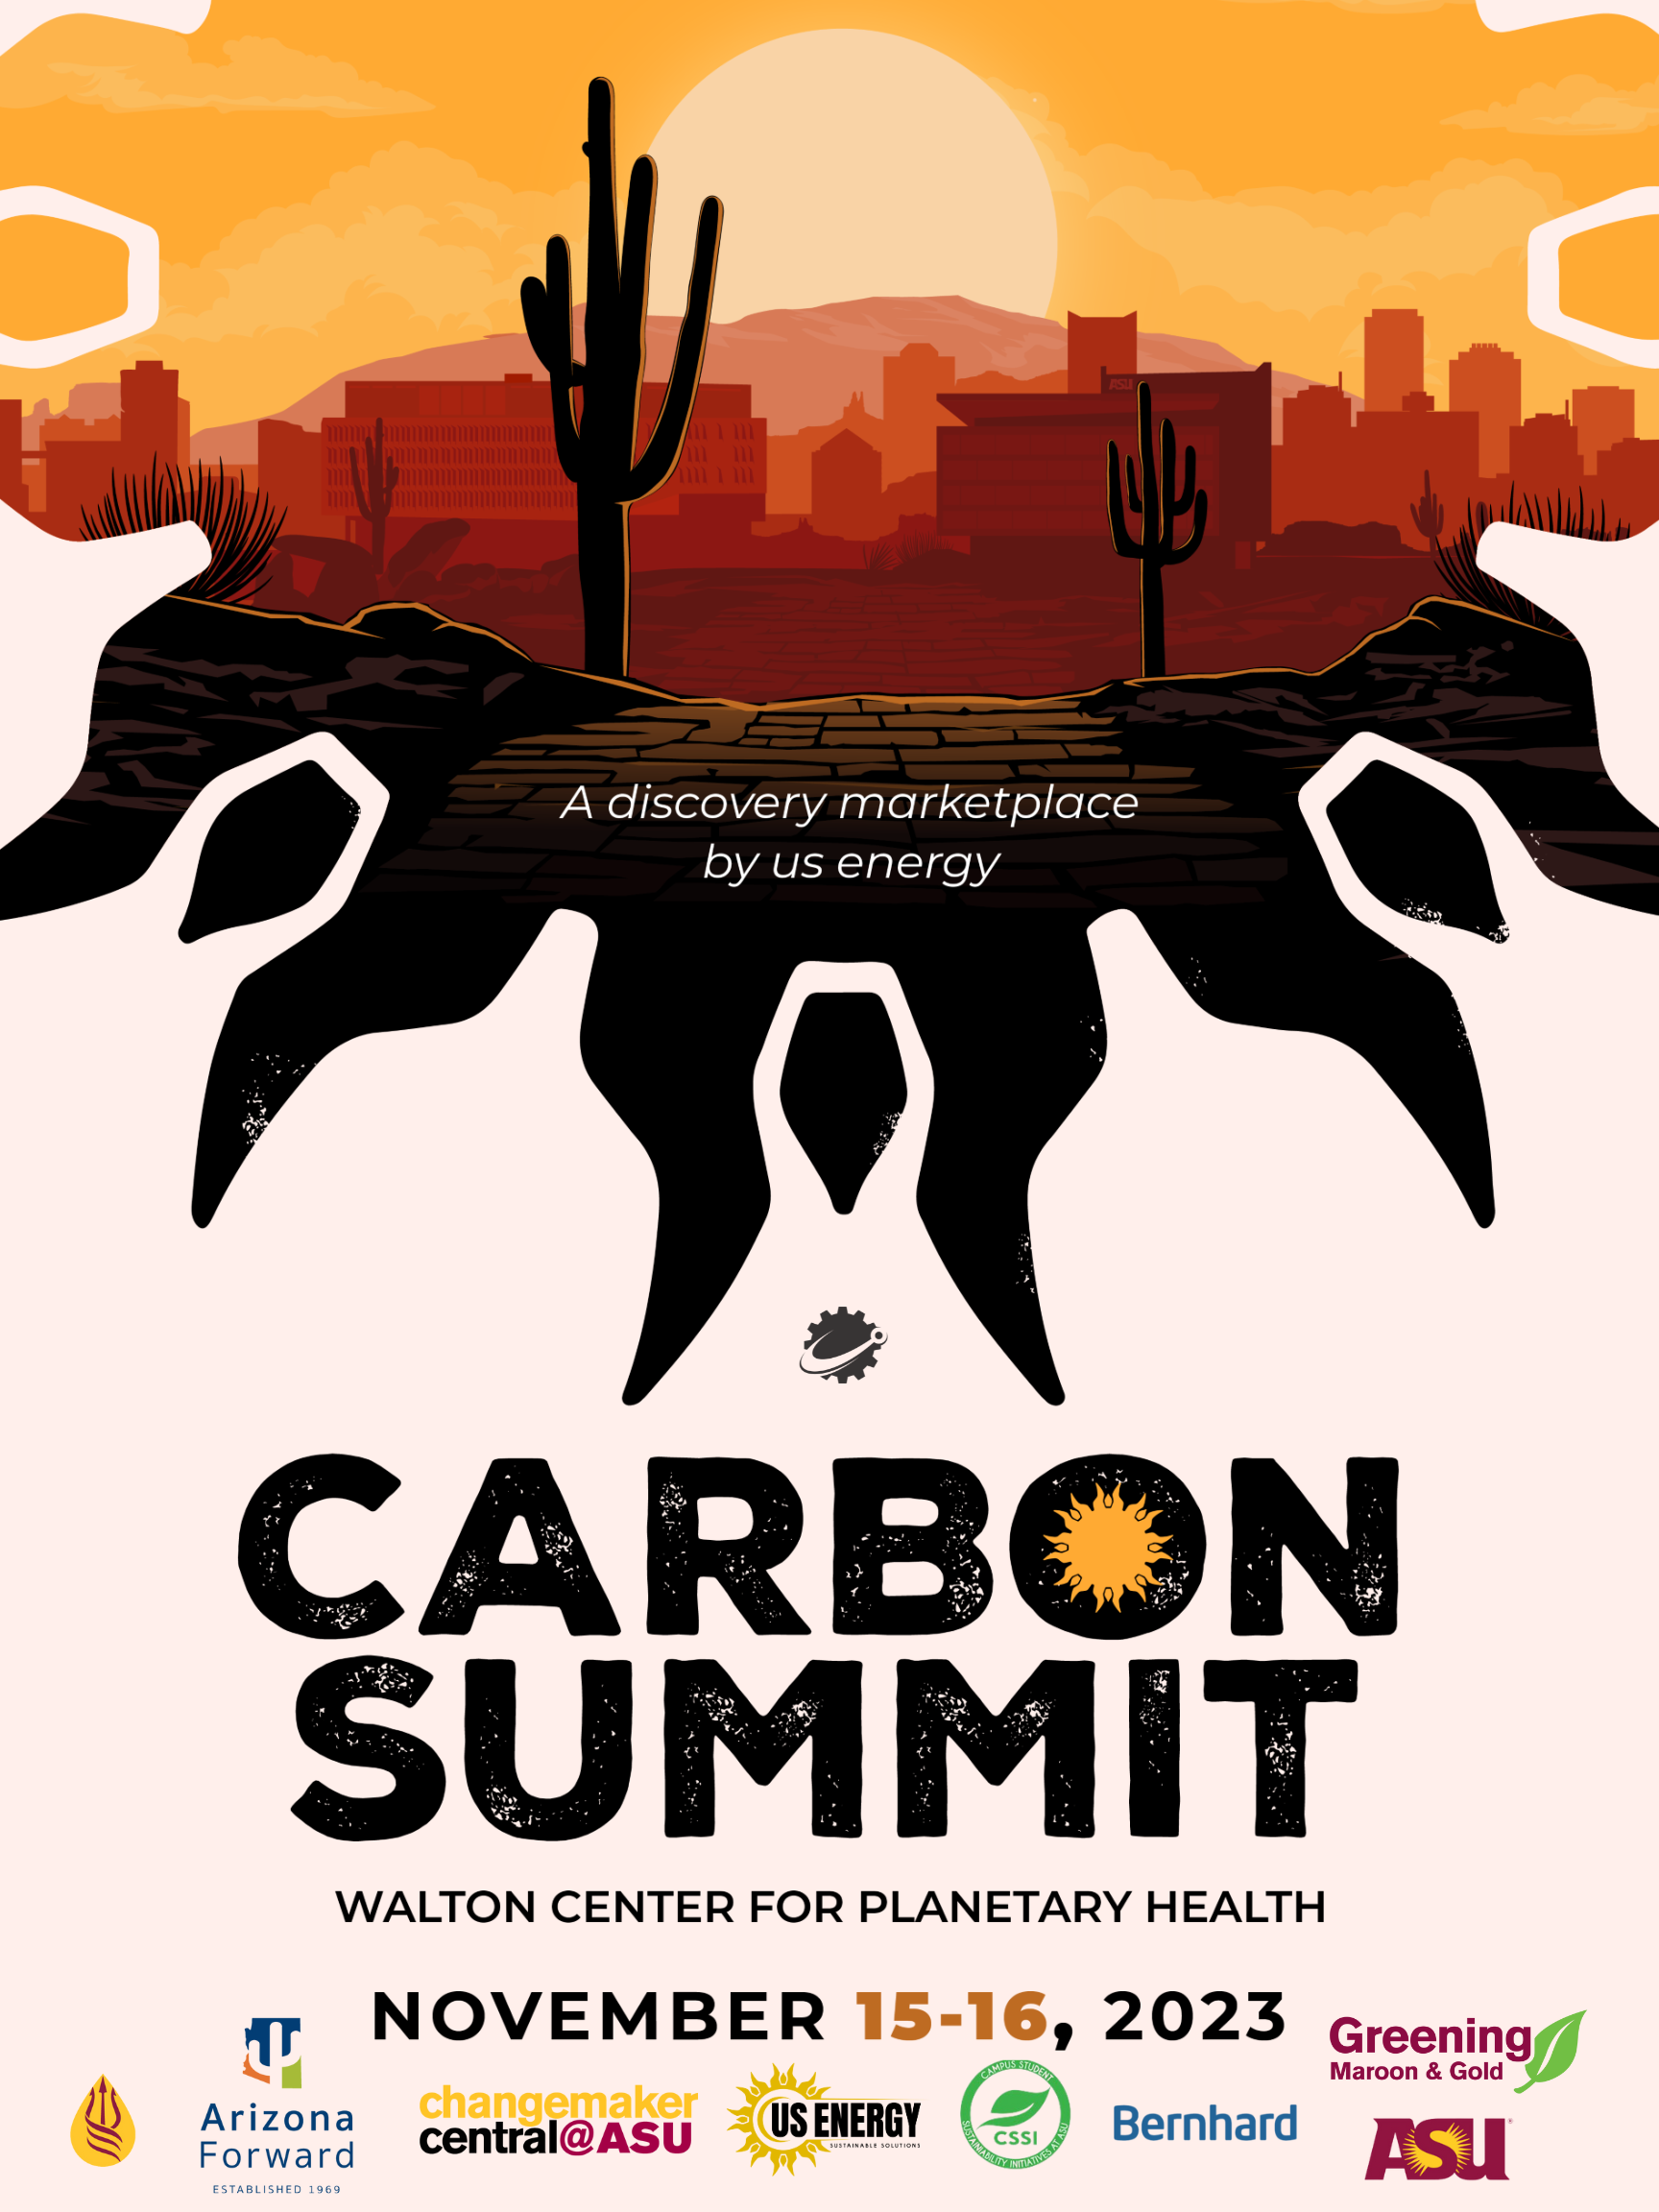 The Carbon Summit Poster - November 15th-16th - Walton Center for Planetary Health